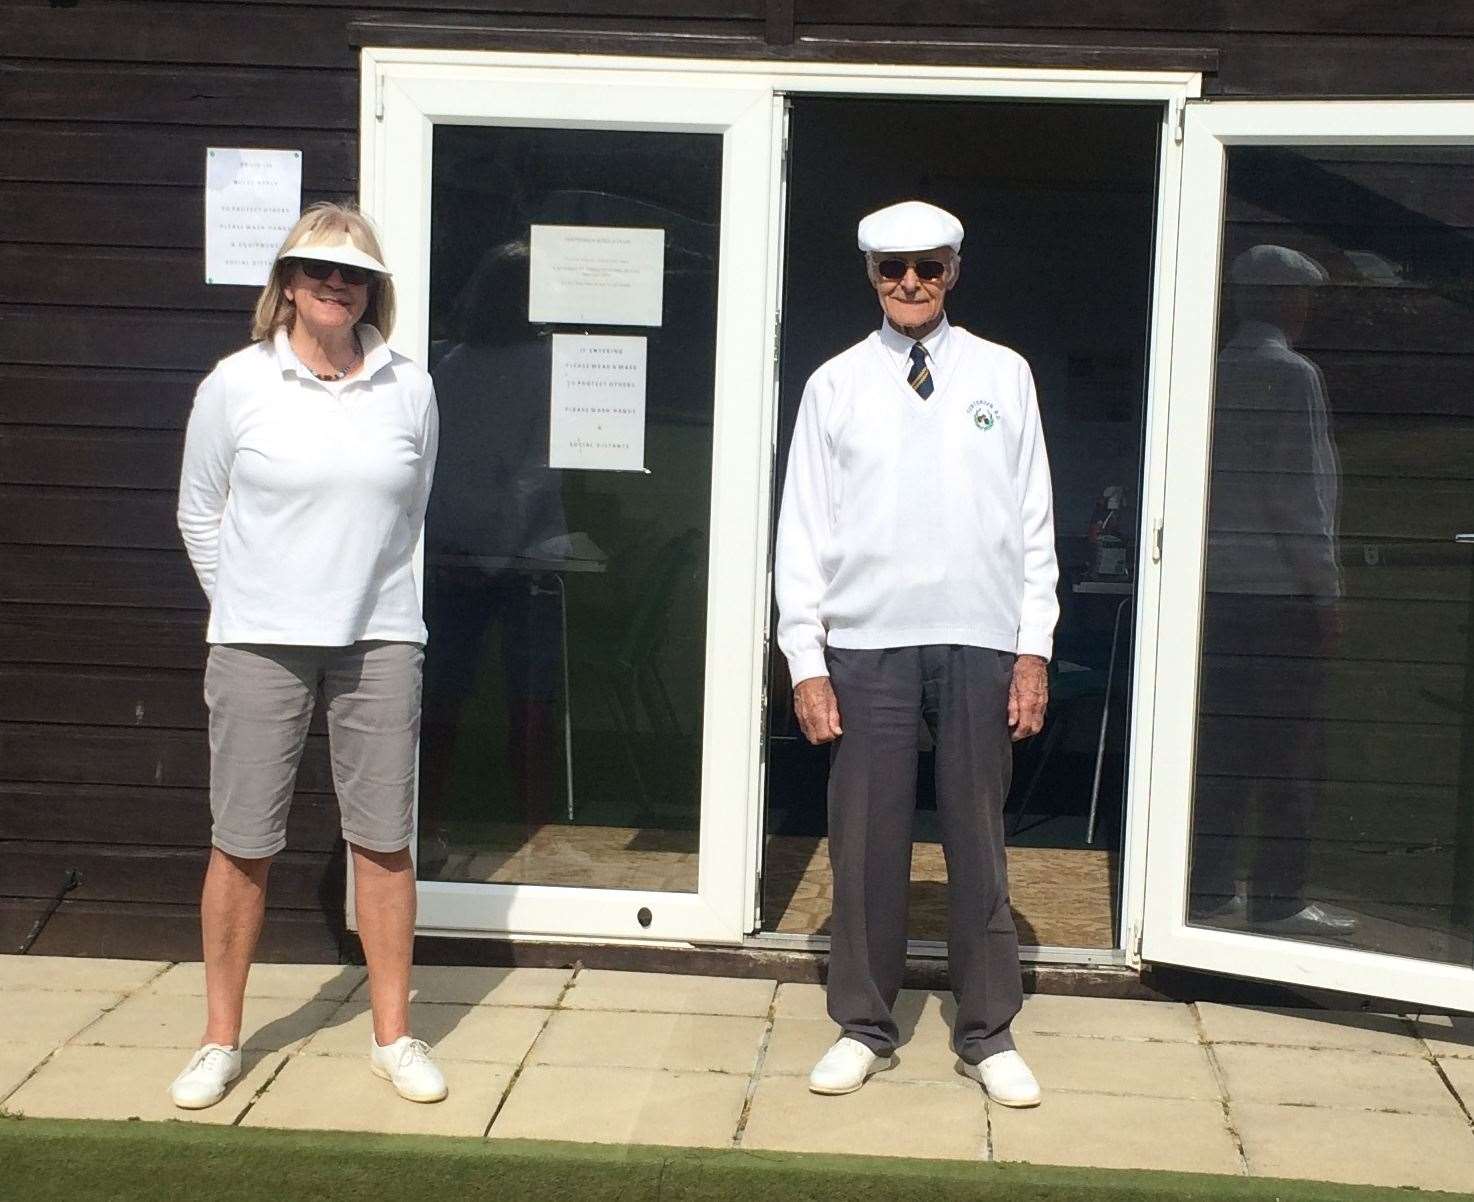 Ron Monk and Nel Joint at Tenterden Bowls Club